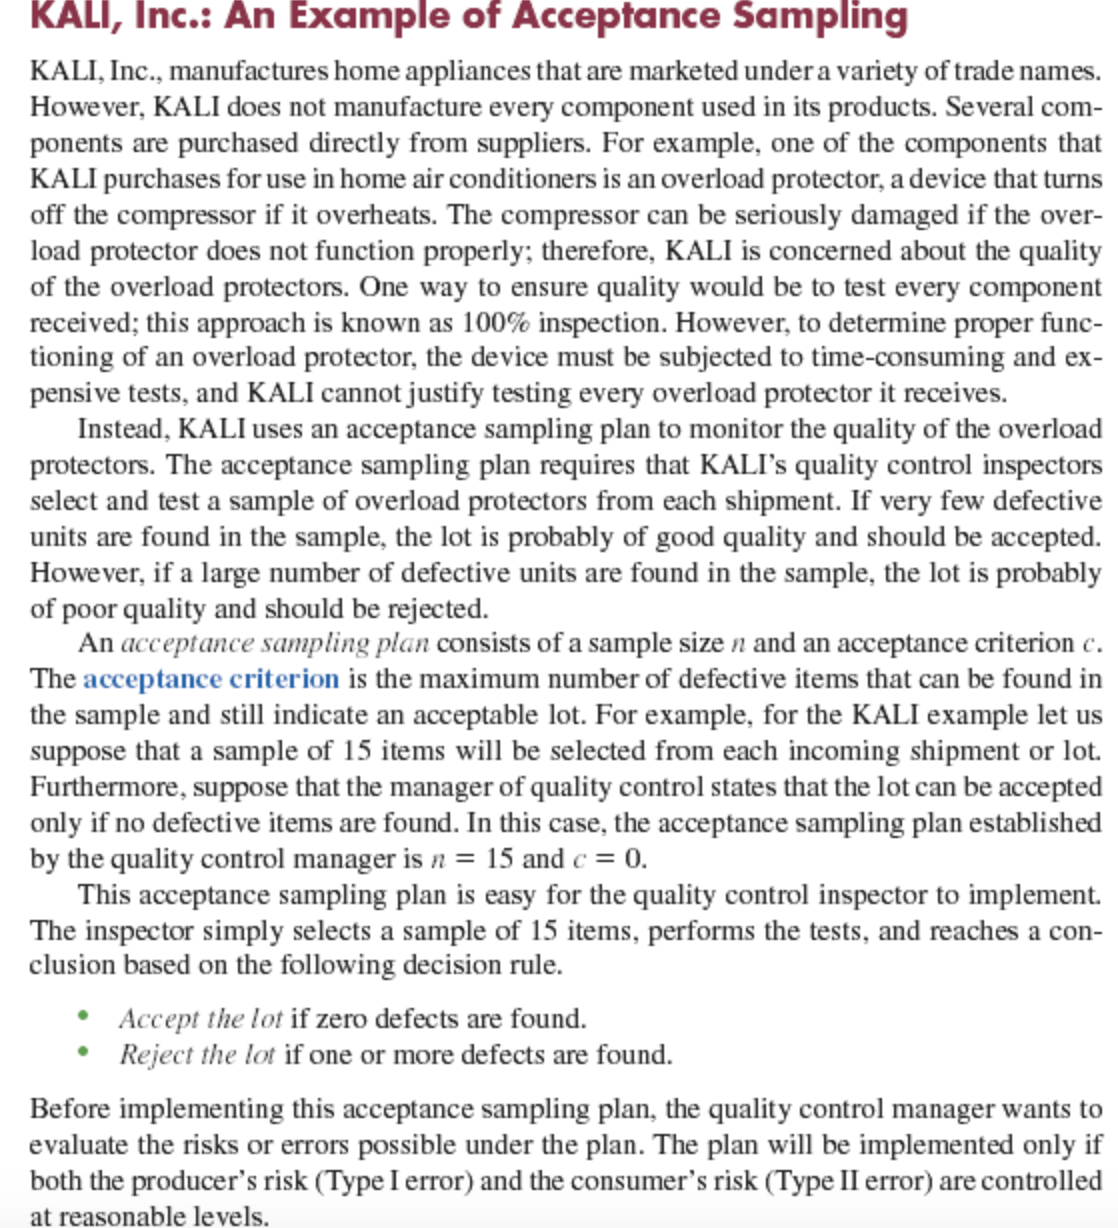 KALI, Inc.: An Example of Acceptance Sampling
KALI, Inc., manufactures home appliances that are marketed under a variety of trade names.
However, KALI does not manufacture every component used in its products. Several com-
ponents are purchased directly from suppliers. For example, one of the components that
KALI purchases for use in home air conditioners is an overload protector, a device that turns
off the compressor if it overheats. The compressor can be seriously damaged if the over-
load protector does not function properly; therefore, KALI is concerned about the quality
of the overload protectors. One way to ensure quality would be to test every component
received; this approach is known as 100% inspection. However, to determine proper func-
tioning of an overload protector, the device must be subjected to time-consuming and ex-
pensive tests, and KALI cannot justify testing every overload protector it receives.
Instead, KALI uses an acceptance sampling plan to monitor the quality of the overload
protectors. The acceptance sampling plan requires that KALI's quality control inspectors
select and test a sample of overload protectors from each shipment. If very few defective
units are found in the sample, the lot is probably of good quality and should be accepted.
However, if a large number of defective units are found in the sample, the lot is probably
of poor quality and should be rejected.
An acceptance sampling plan consists of a sample size n and an acceptance criterion c.
The acceptance criterion is the maximum number of defective items that can be found in
the sample and still indicate an acceptable lot. For example, for the KALI example let us
suppose that a sample of 15 items will be selected from each incoming shipment or lot.
Furthermore, suppose that the manager of quality control states that the lot can be accepted
only if no defective items are found. In this case, the acceptance sampling plan established
by the quality control manager is n = 15 and c = 0.
This acceptance sampling plan is easy for the quality control inspector to implement.
The inspector simply selects a sample of 15 items, performs the tests, and reaches a con-
clusion based on the following decision rule.
Accept the lot if zero defects are found.
Reject the lot if one or more defects are found.
Before implementing this acceptance sampling plan, the quality control manager wants to
evaluate the risks or errors possible under the plan. The plan will be implemented only if
both the producer's risk (Type I error) and the consumer's risk (Type II error) are controlled
at reasonable levels.
